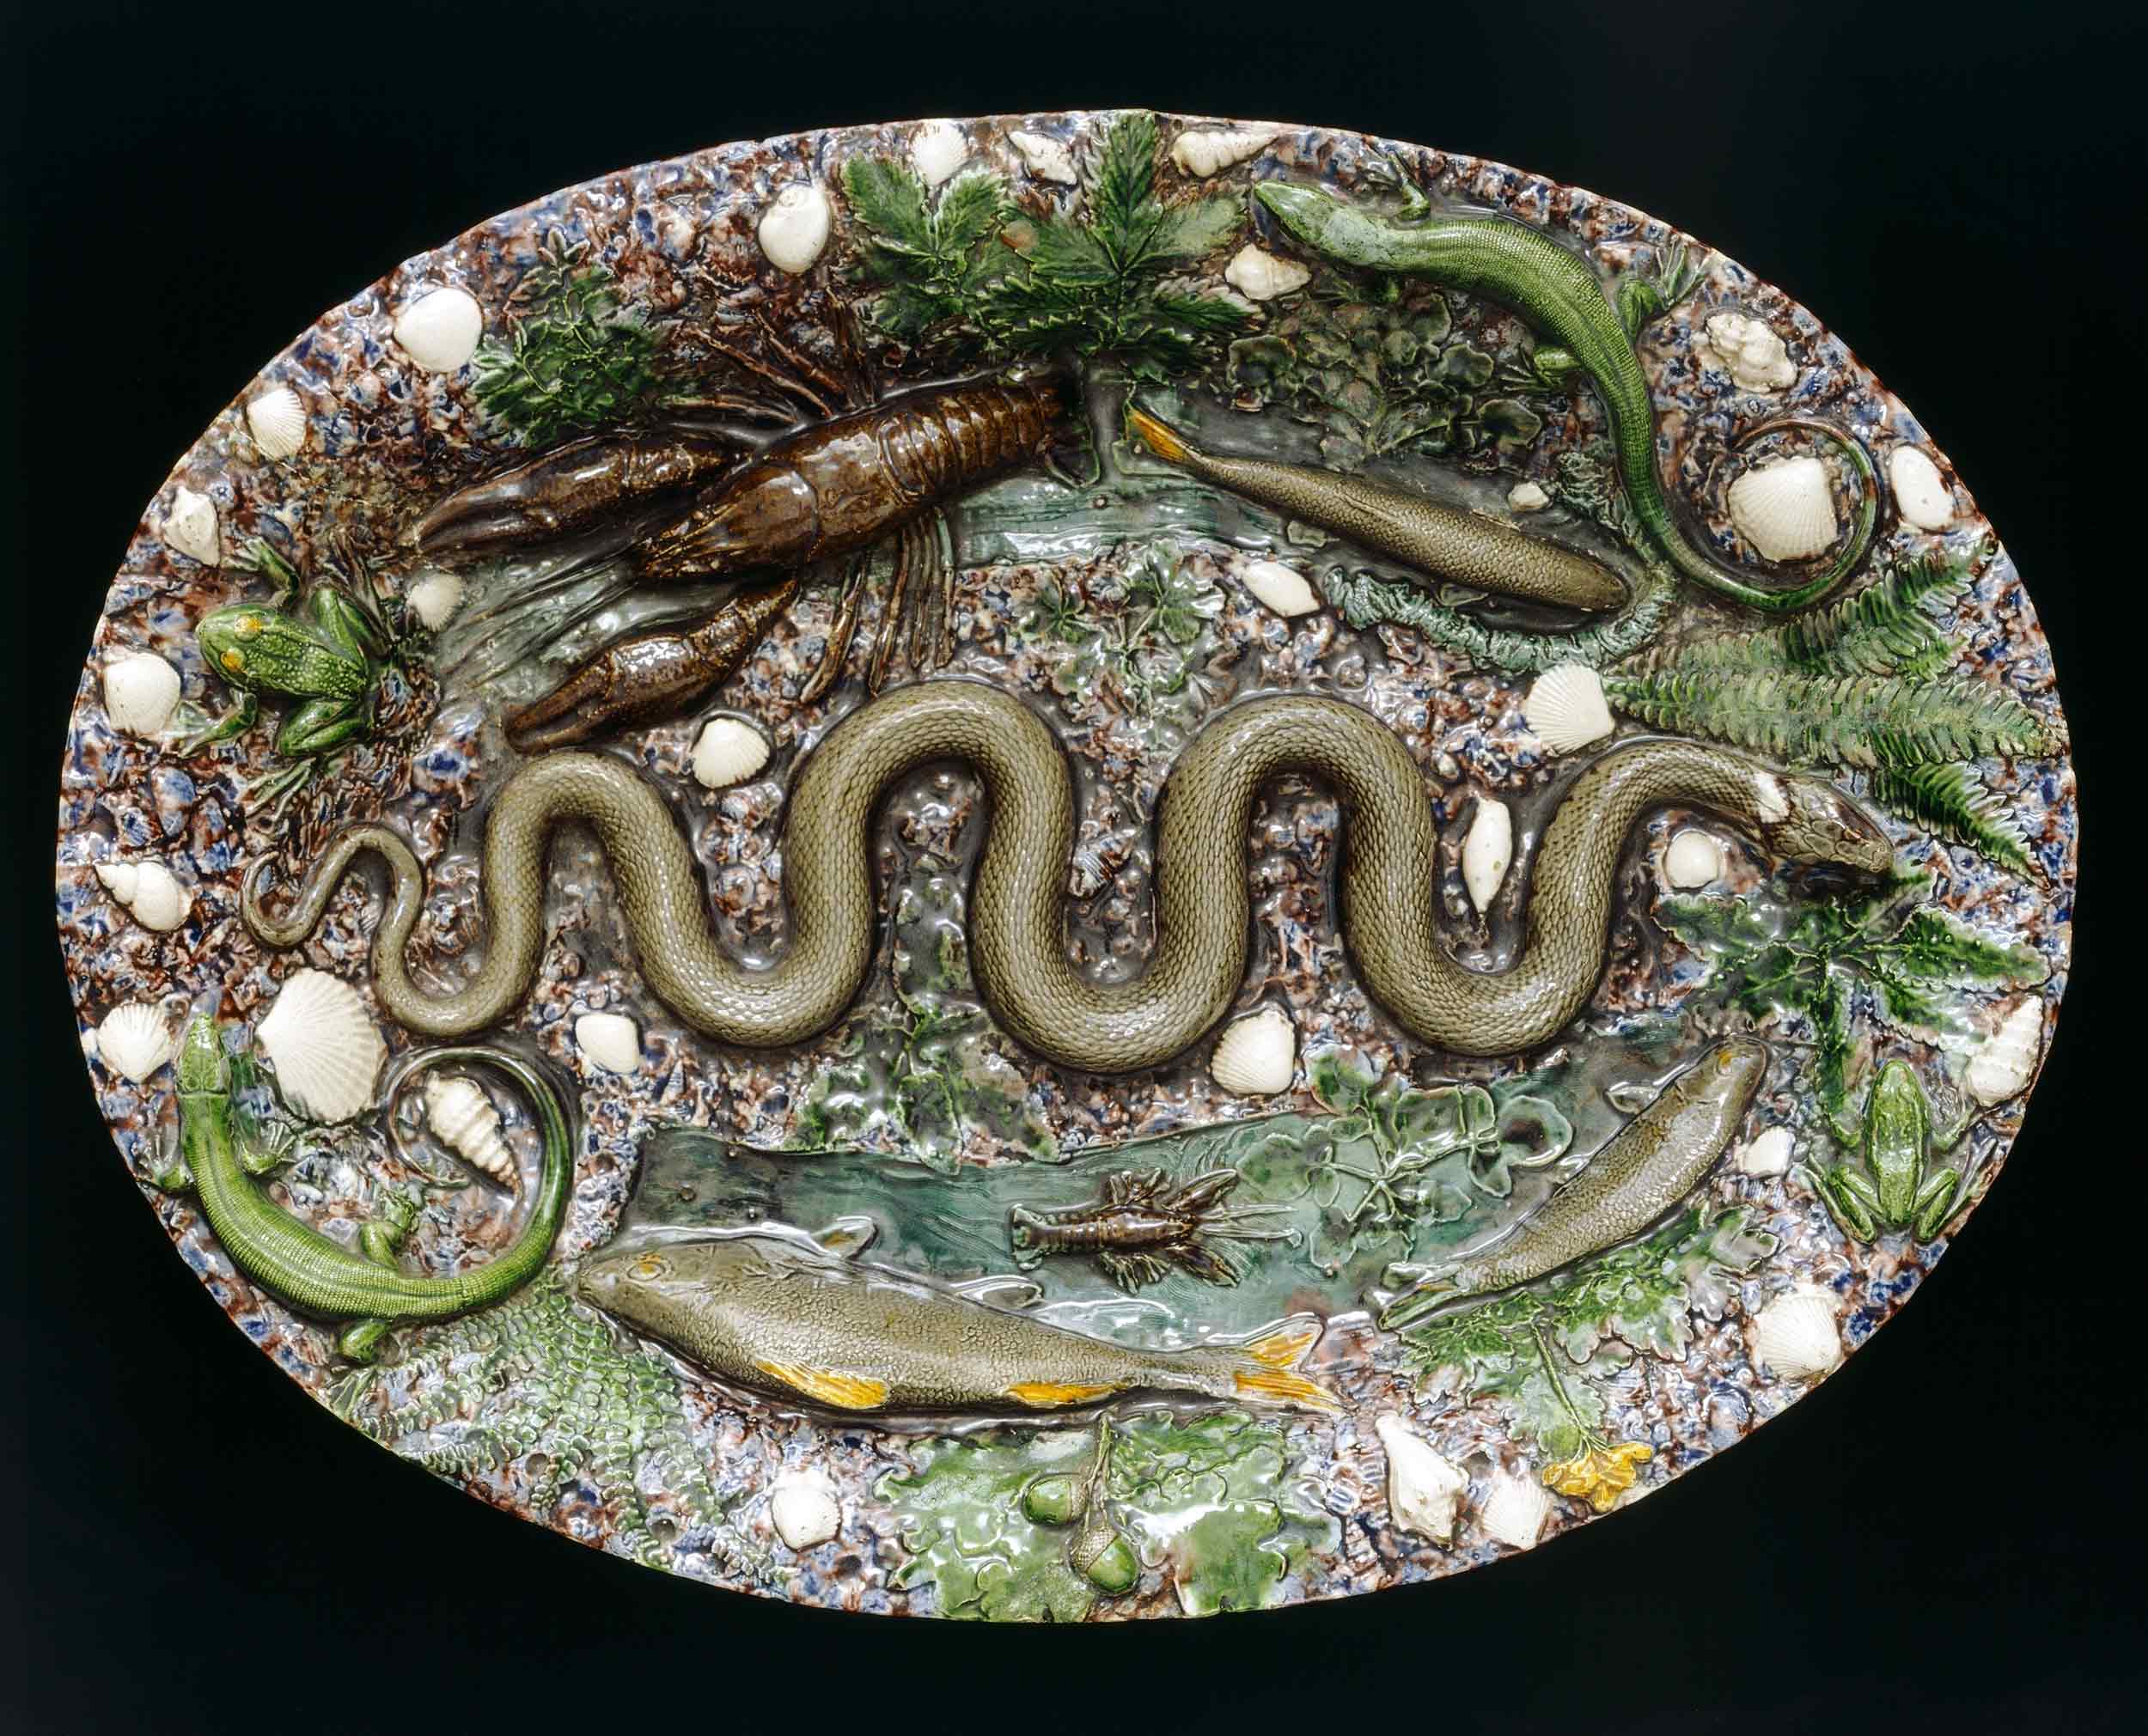 Oval dish with moulded eel, fish and crab, by Bernard Palissy, 1565–75